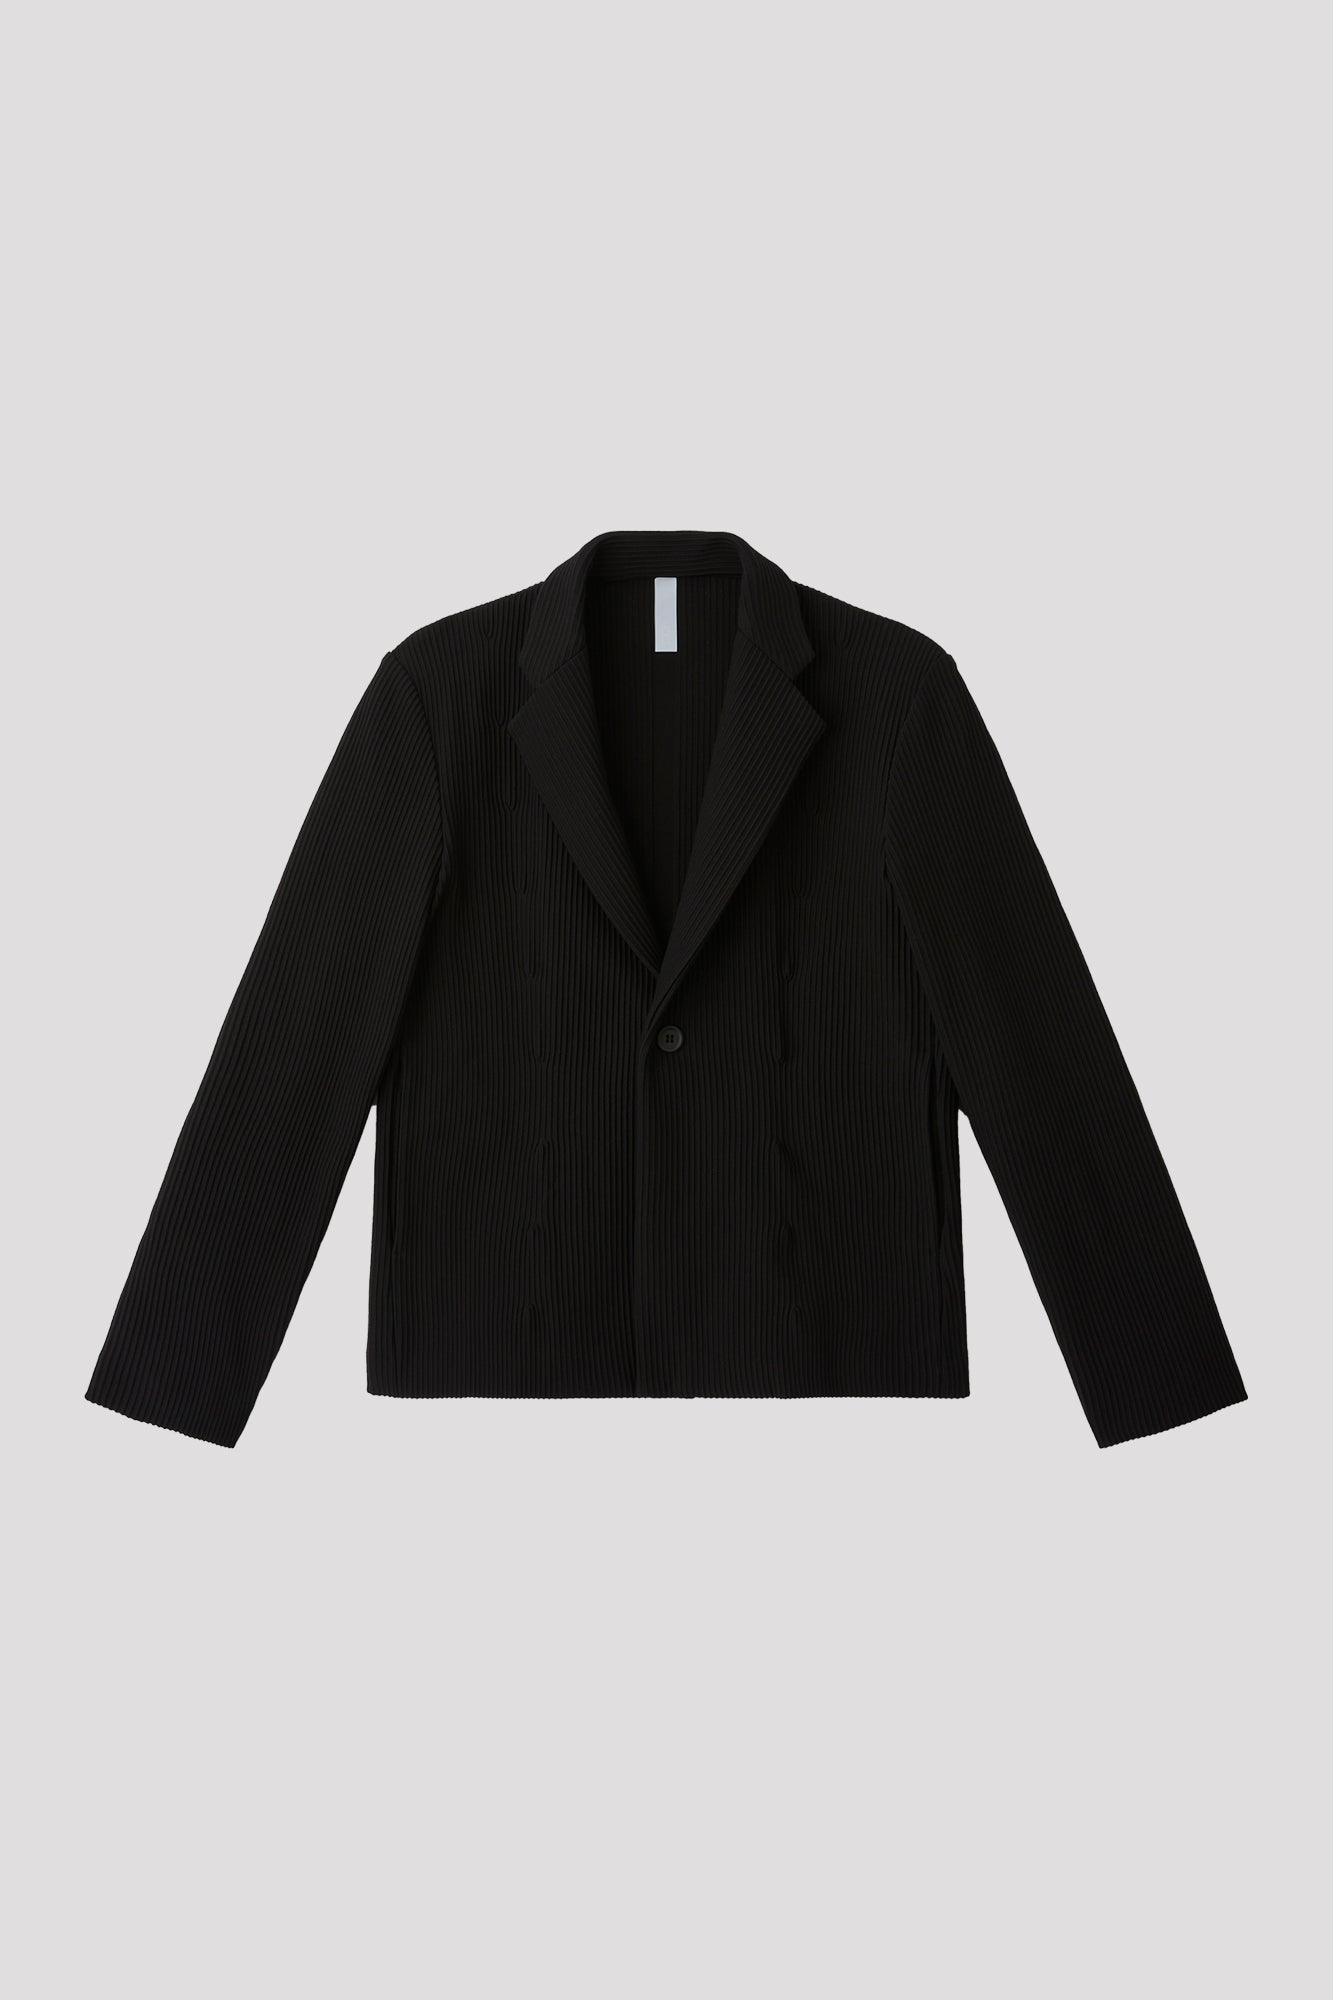 HYPHA TAILORED JACKET